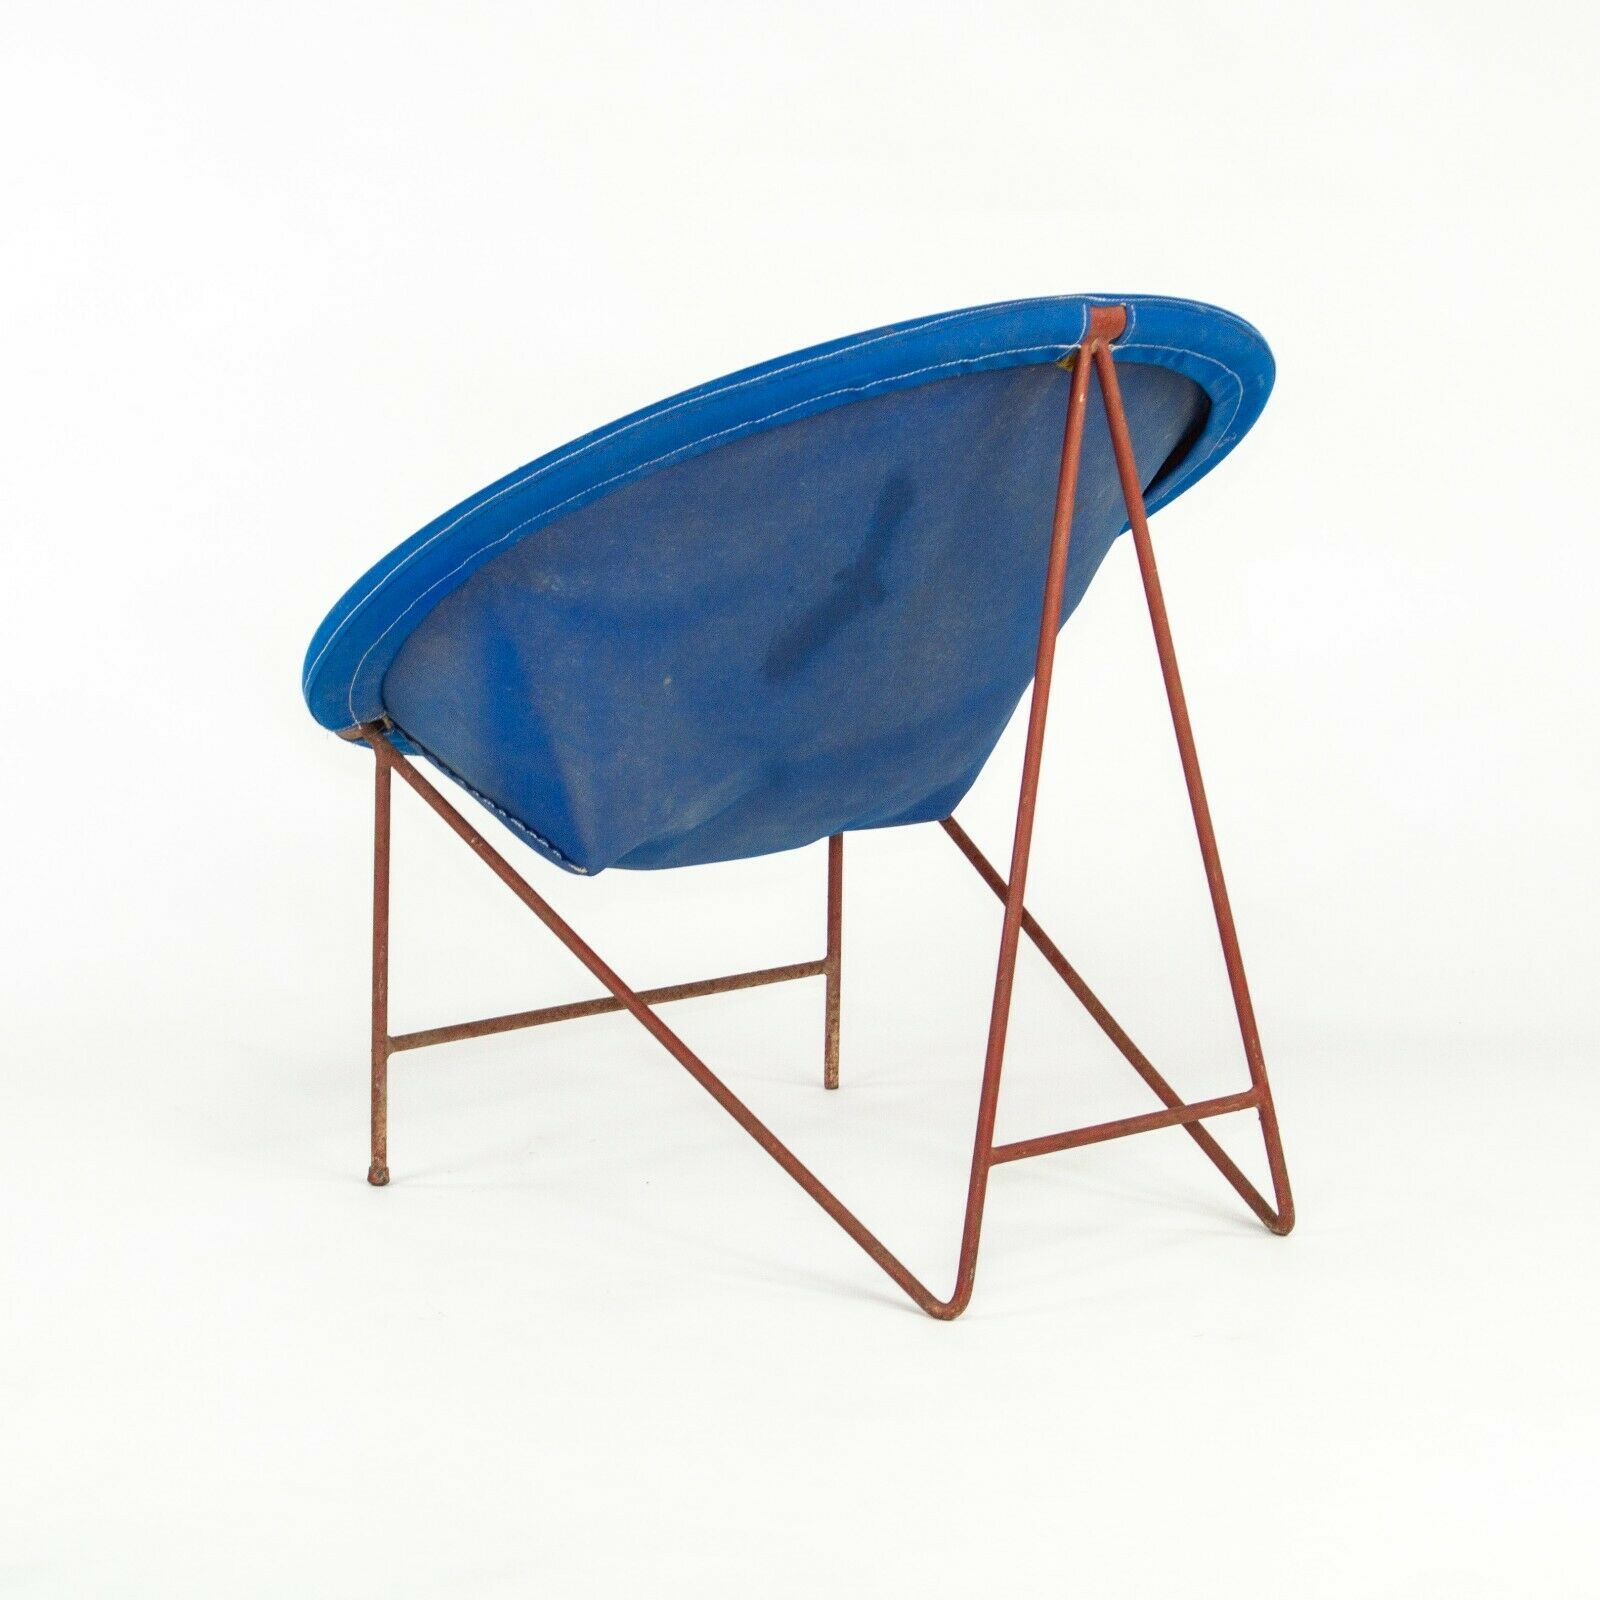 SOLD 1950s Blue Canvas Modern Hoop Chair by Hedstrom of Alabama